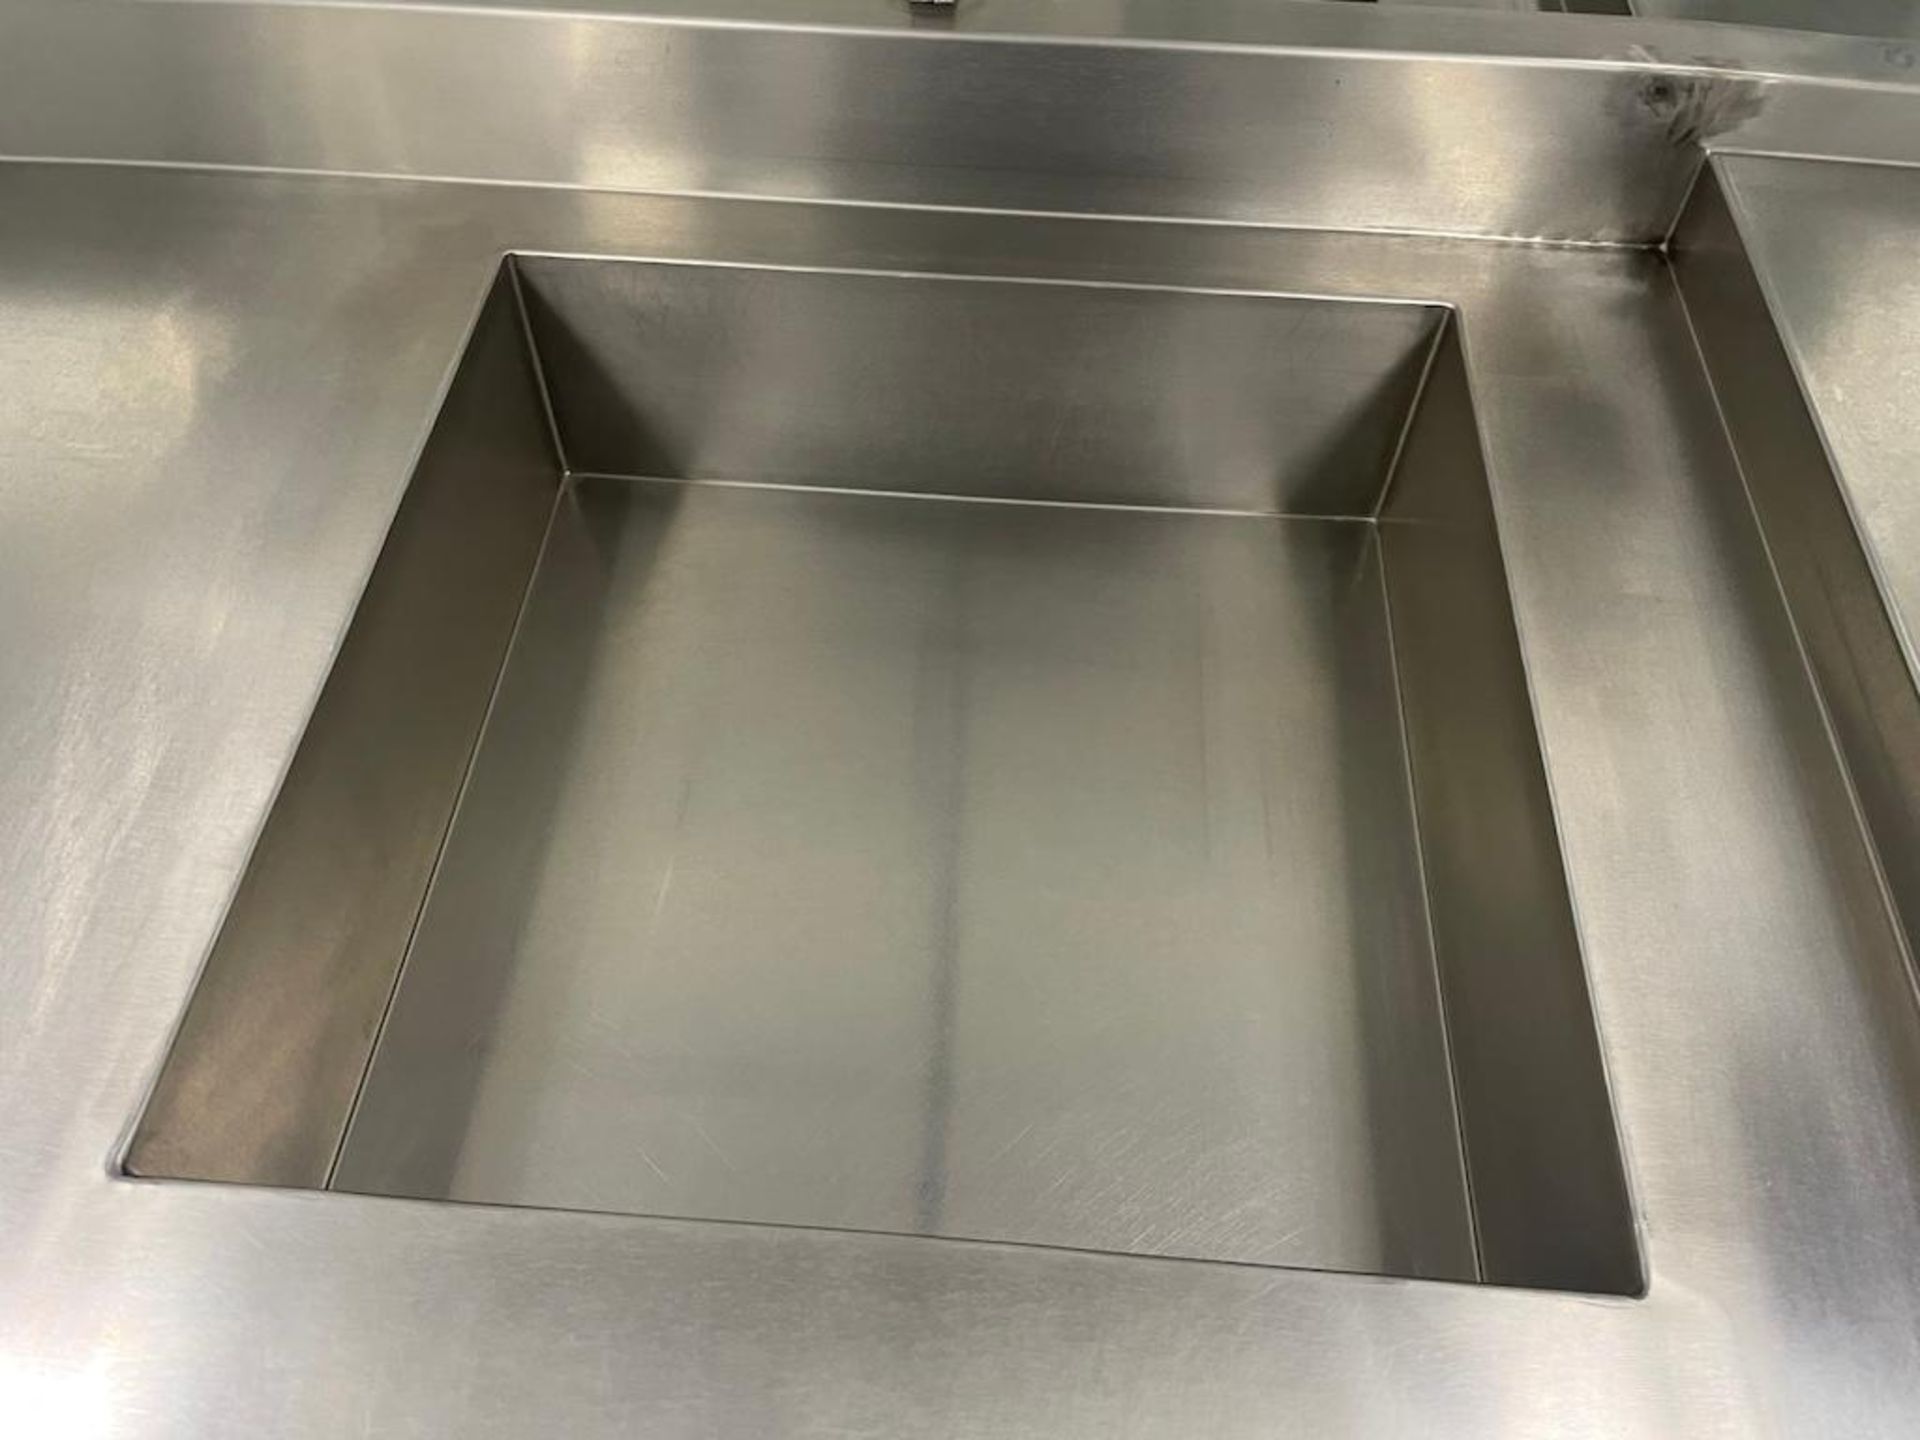 LOT (2) STAINLESS STEEL PORTABLE COUNTERS W SINKS APPROX 99 X 35 IN, (4) STAINLESS STEEL CARTS 36 X - Image 2 of 13